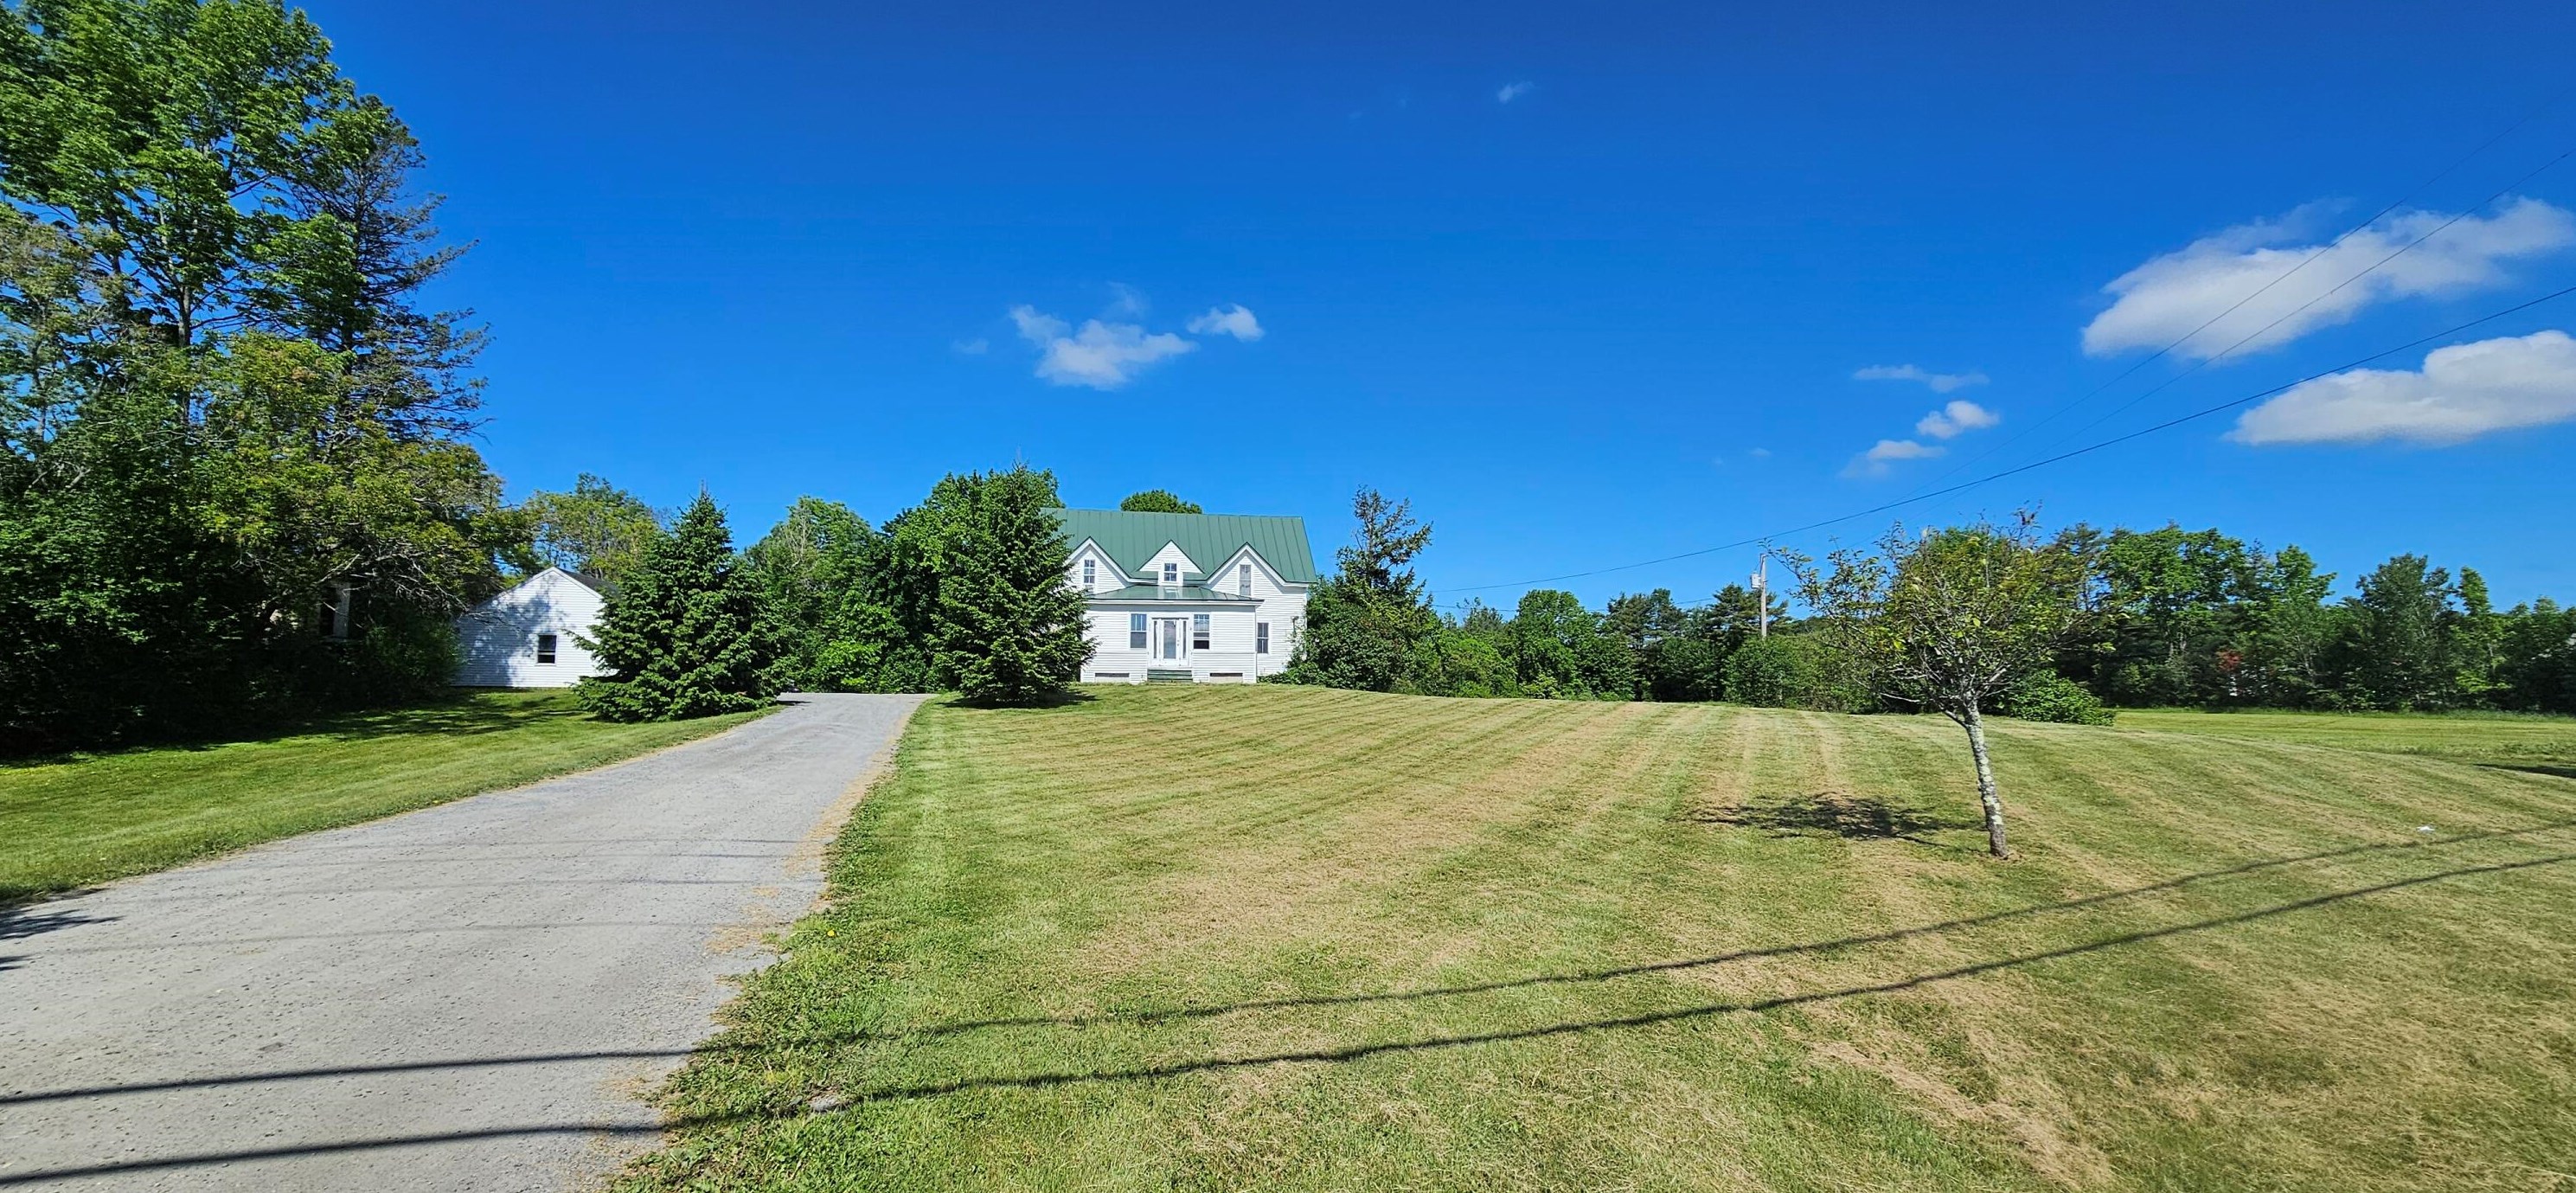 237 W River Rd, Waterville, ME 04901